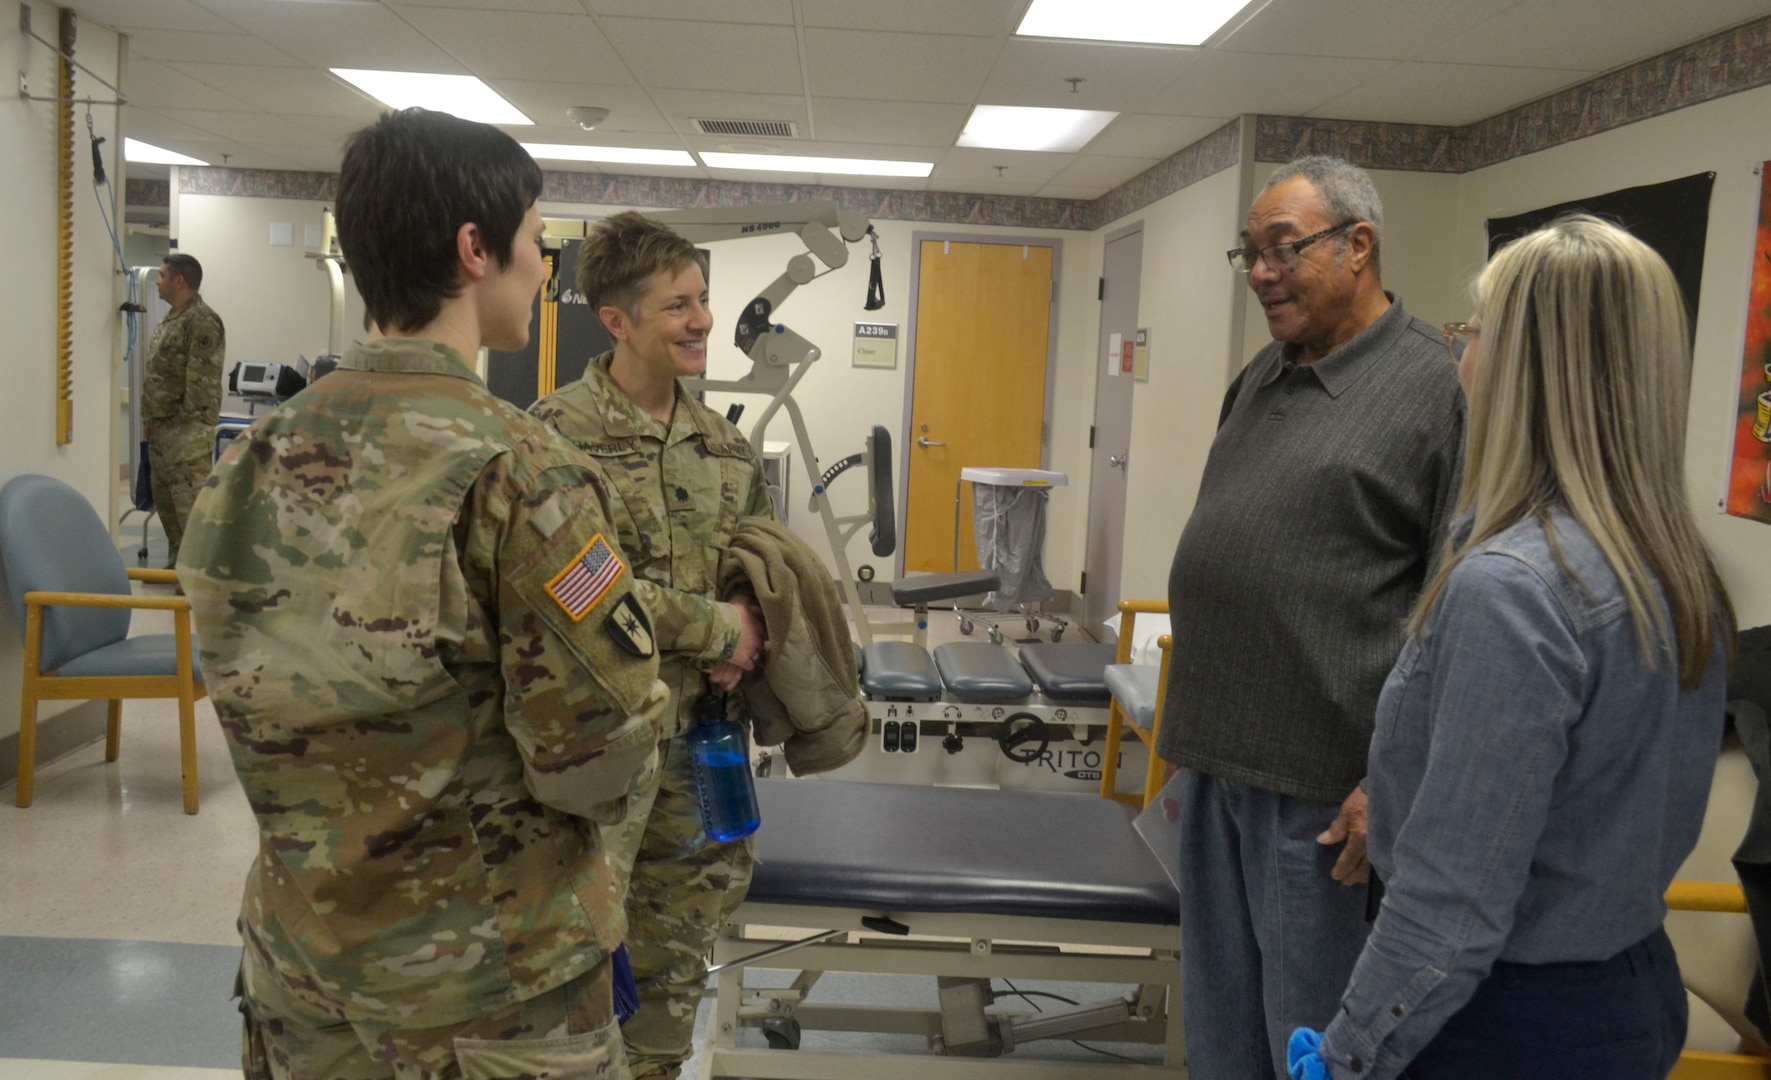 DLA Troop Support military personnel speak with a patient and his physical therapist at the Corporal Michael J. Crescenz Veterans Affairs Medical Center, Feb. 10, 2020 in Philadelphia.